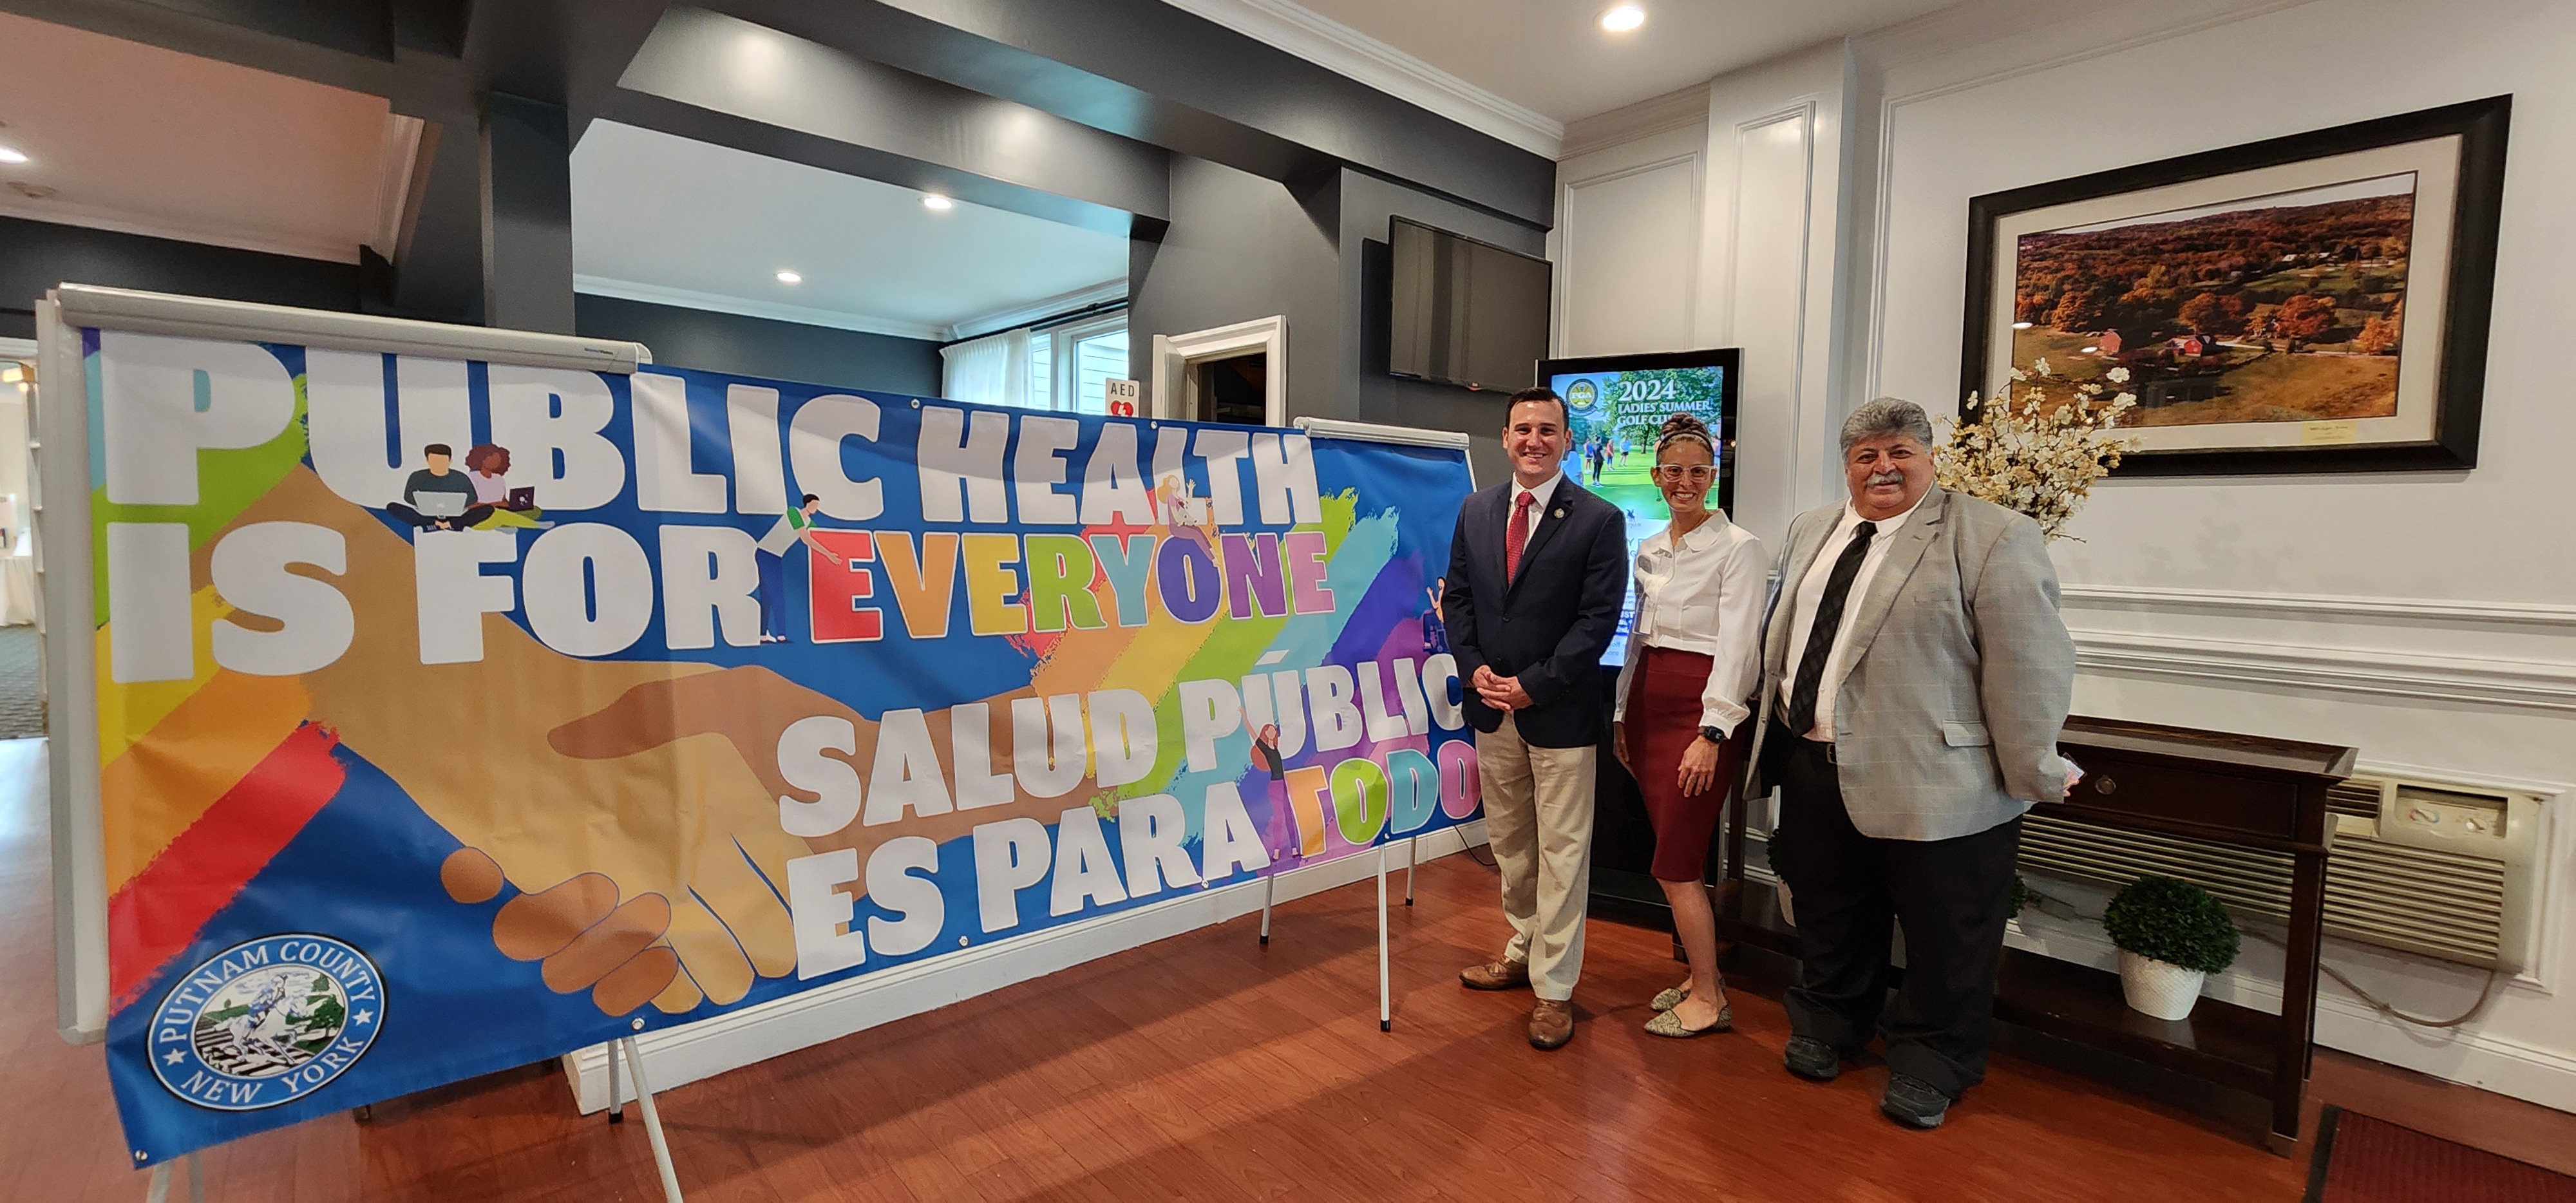 Supported by County Executive Kevin Byrne, left, Shanna Siegel, RN, supervising public health educator and Michael J. Nesheiwat, MD, interim health commissioner, the mantra “Public Health is for Everyone” is at the heart of what public health truly means—inclusive healthcare.